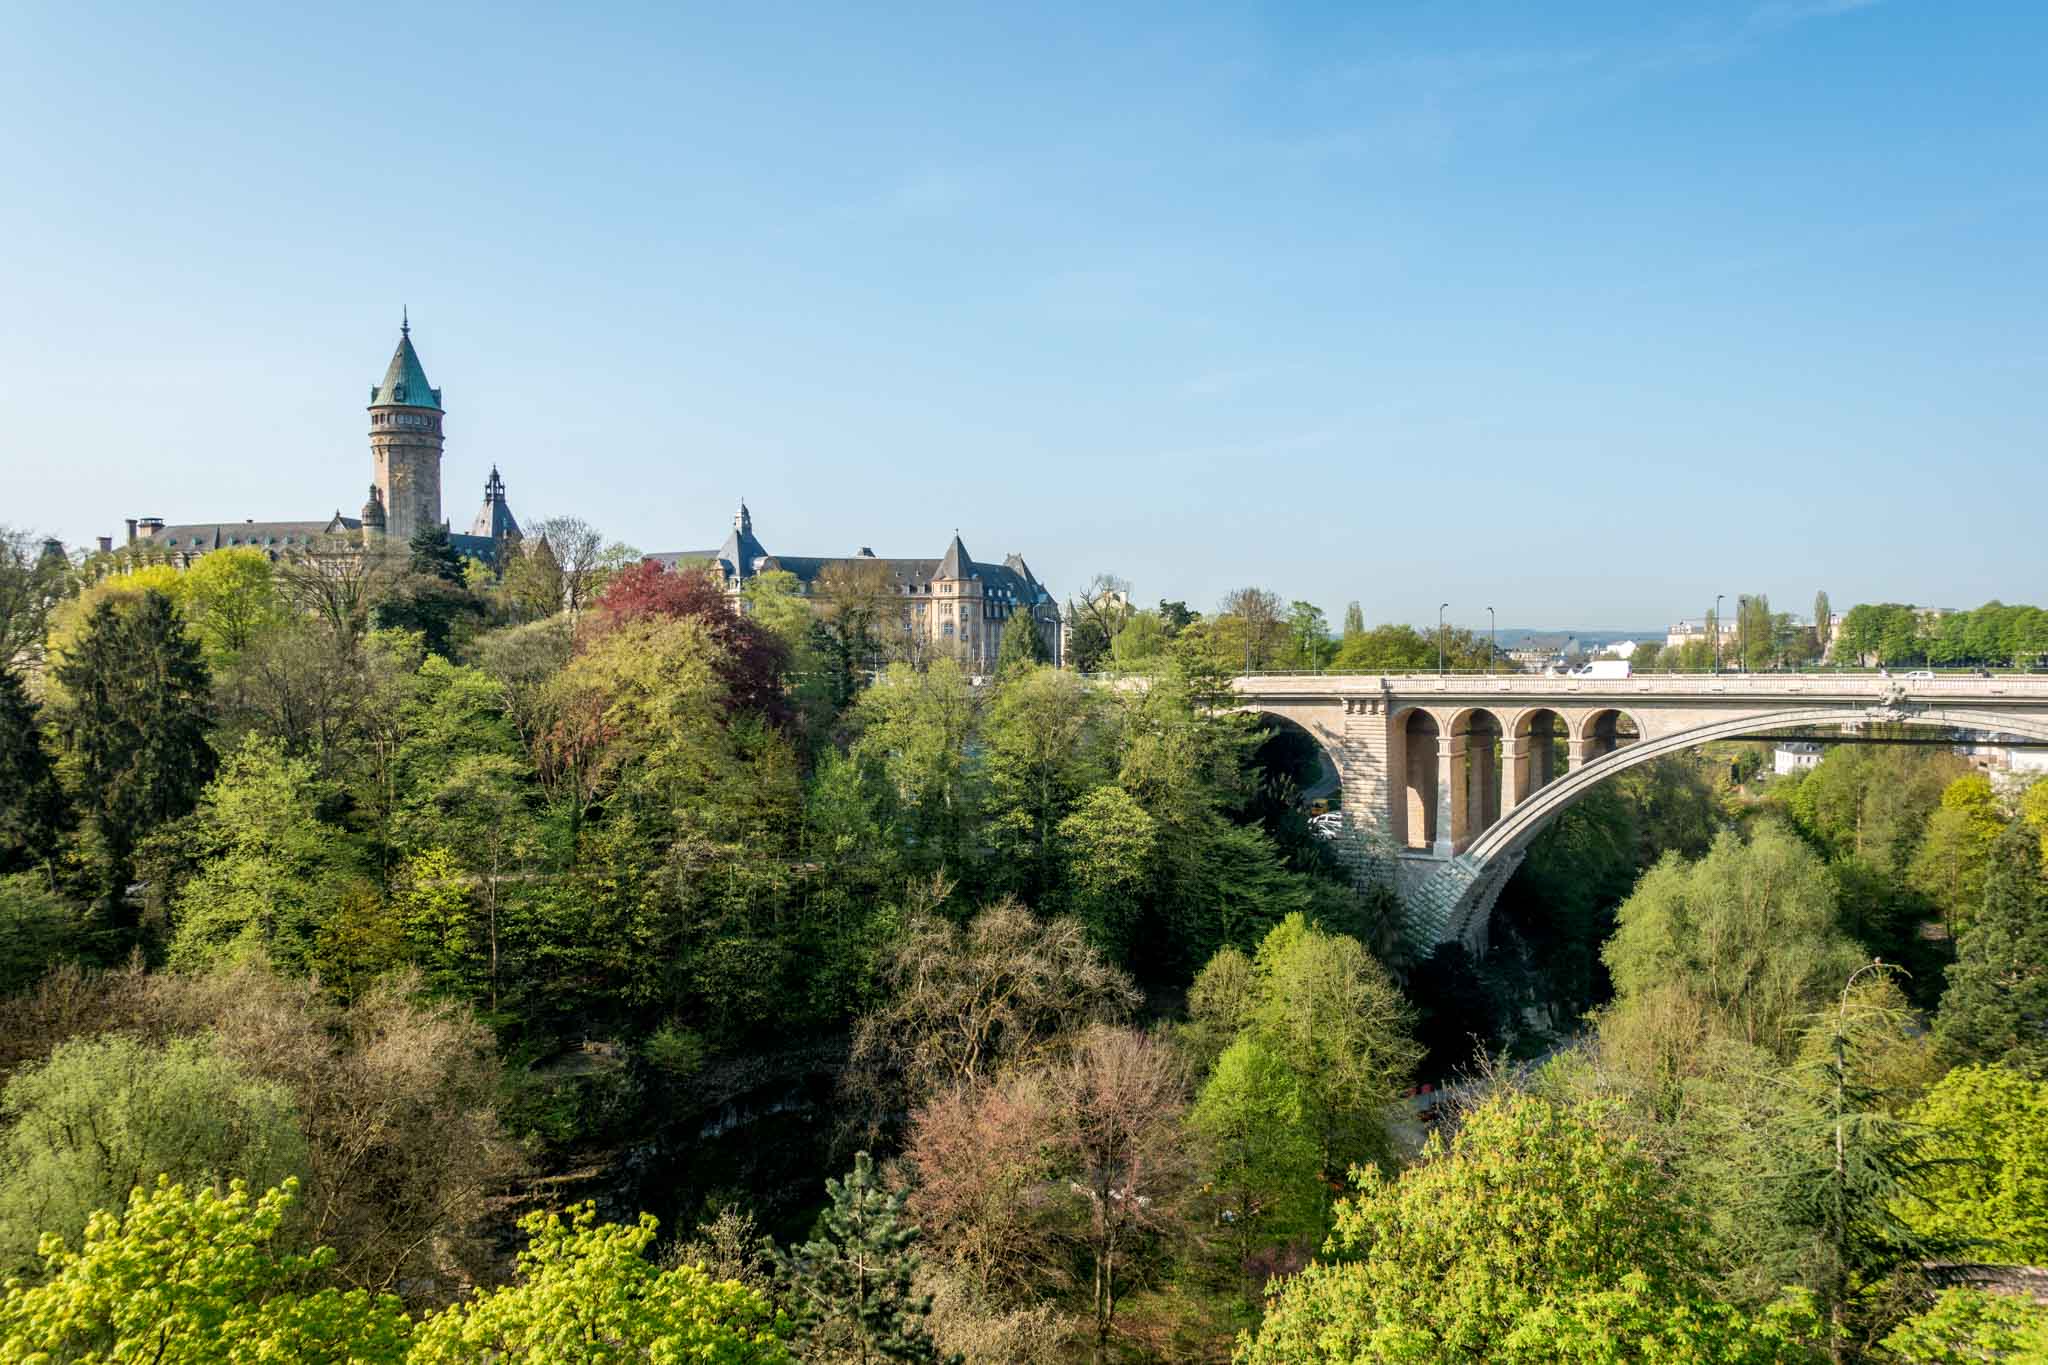 View of bridge and building across a tree-filled valley in Luxembourg City, Luxembourg